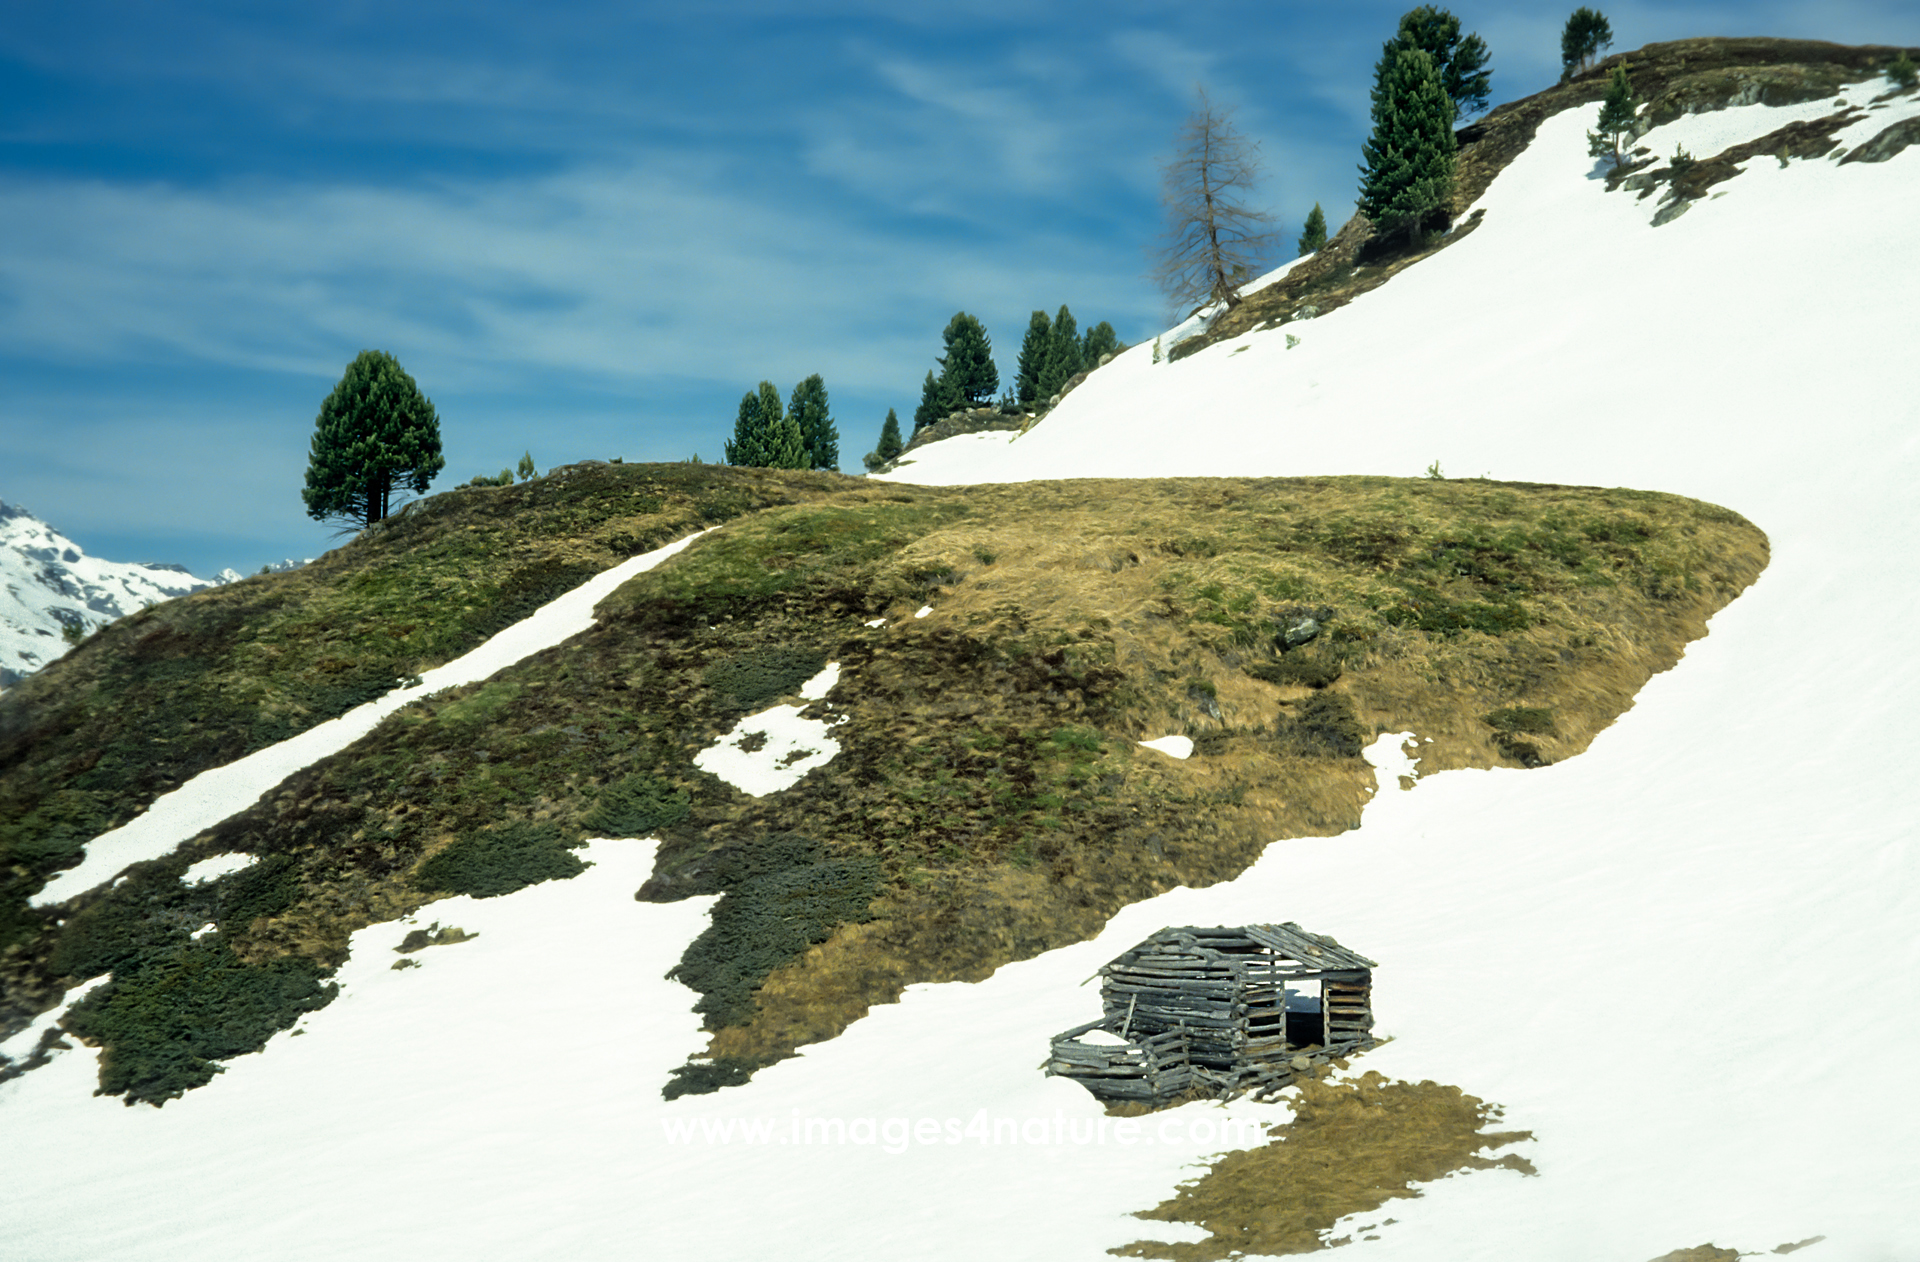 Diagonal snowy mountain slope with trees and a wooden hut